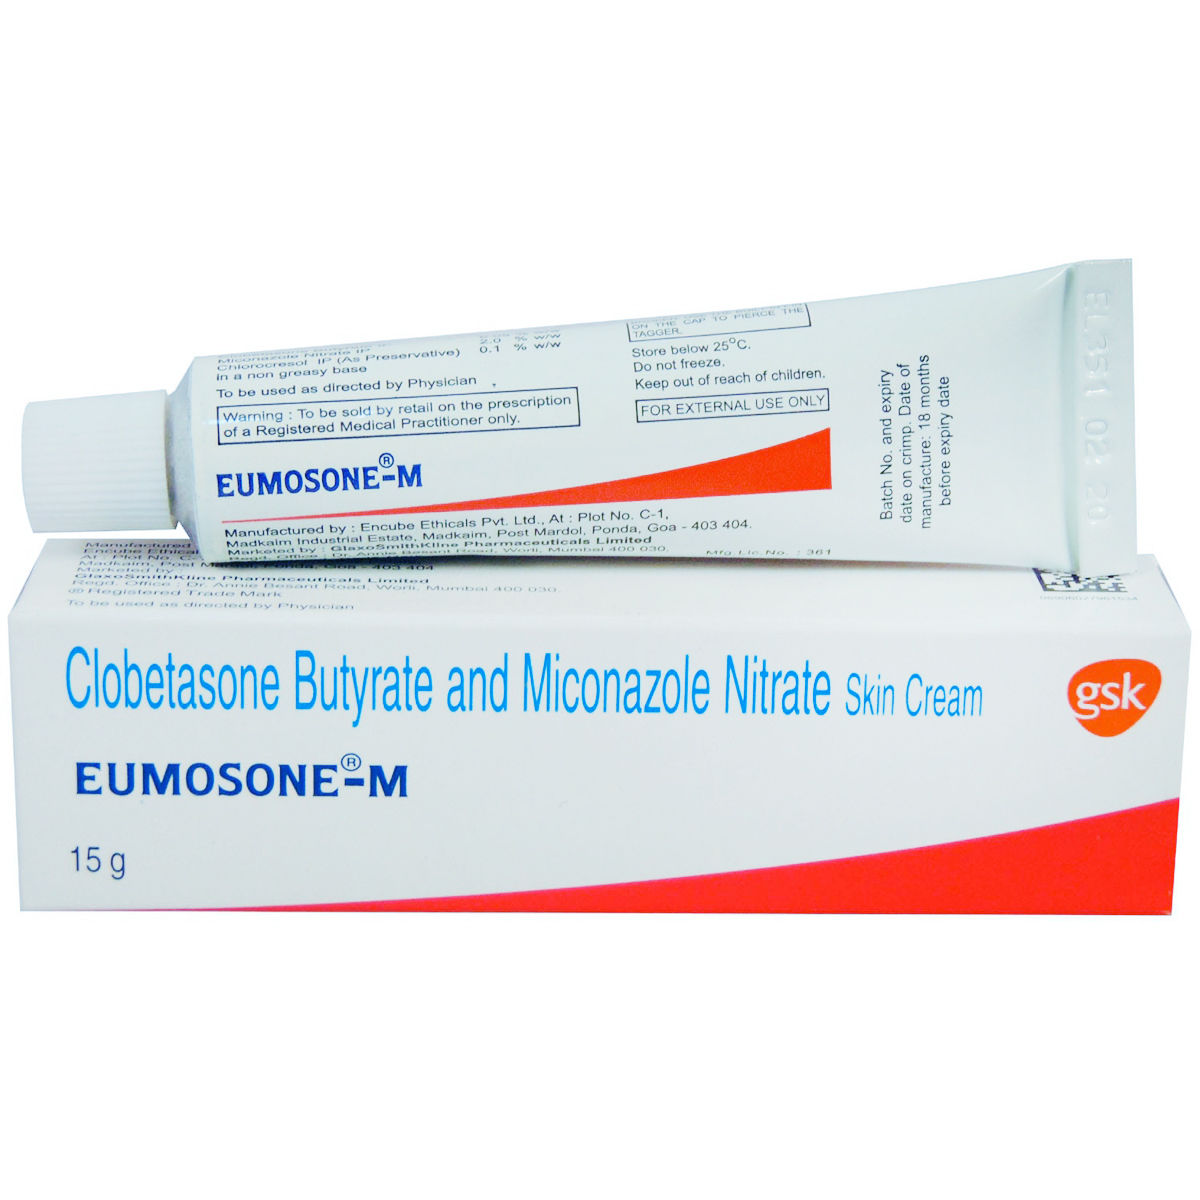 Eumosone-M Cream 15 gm Price, Uses, Side Effects, Composition ...